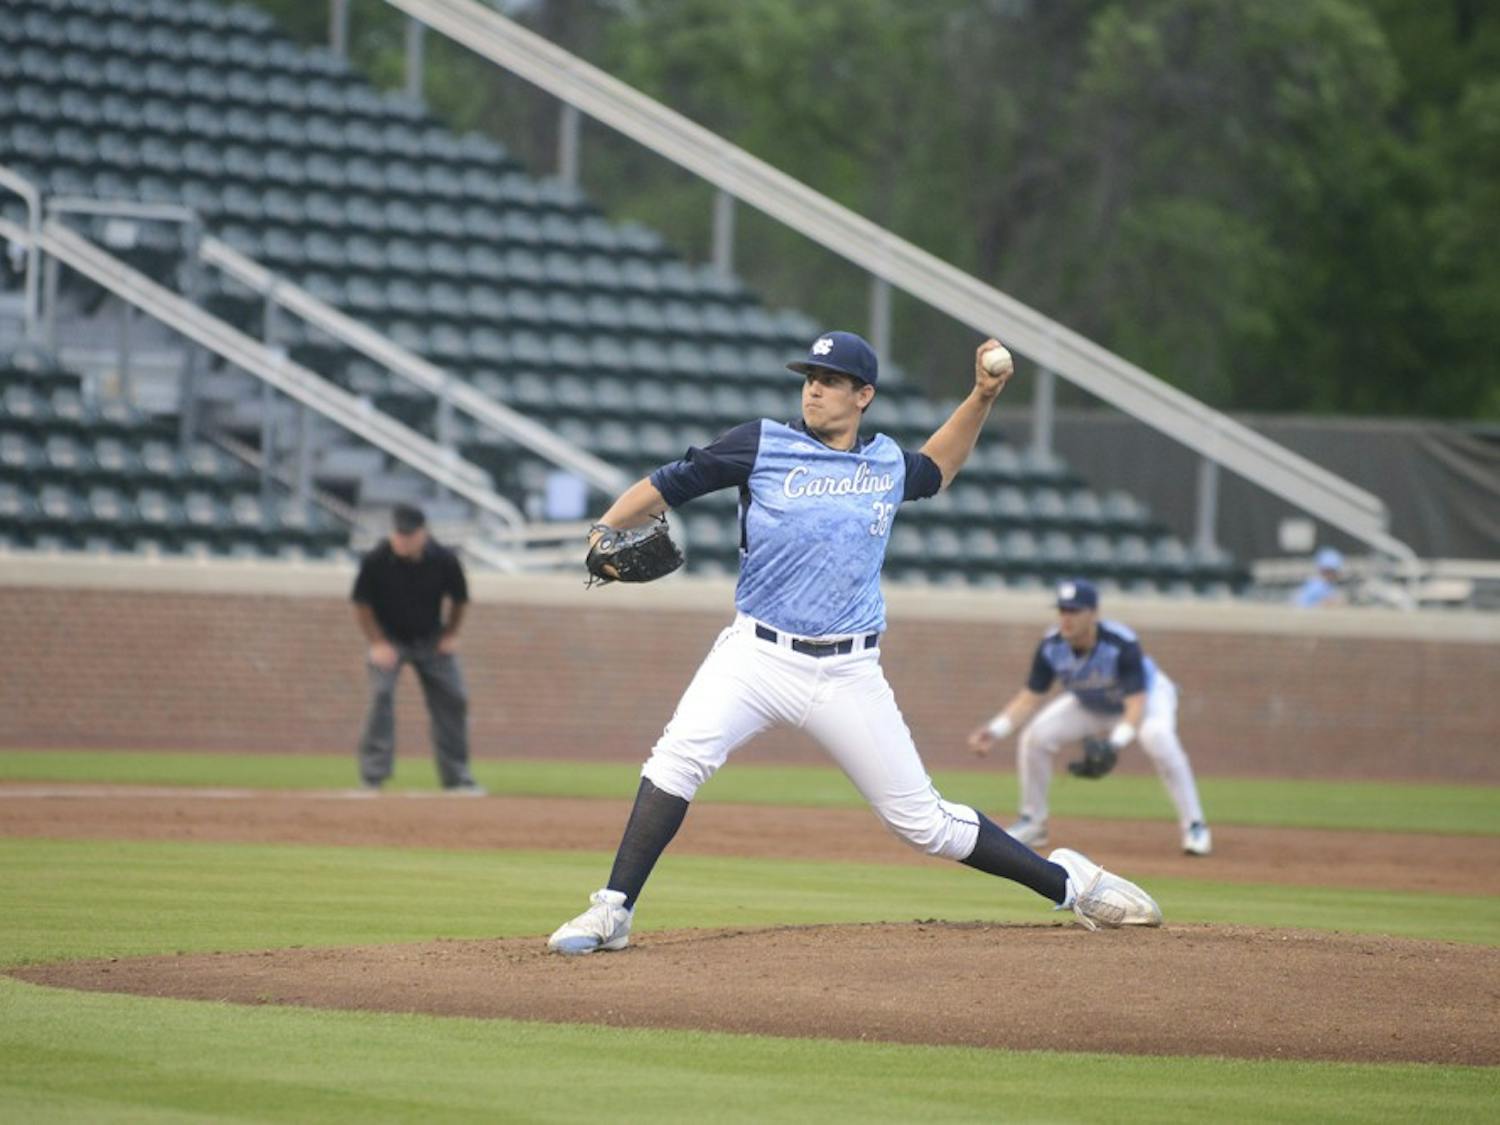 UNC freshman LHP Hunter Williams (36) had 5 Ks and only gave up 3 hits in 5 and 2/3 innings of work (until rain delay) against High Point on Tuesday.